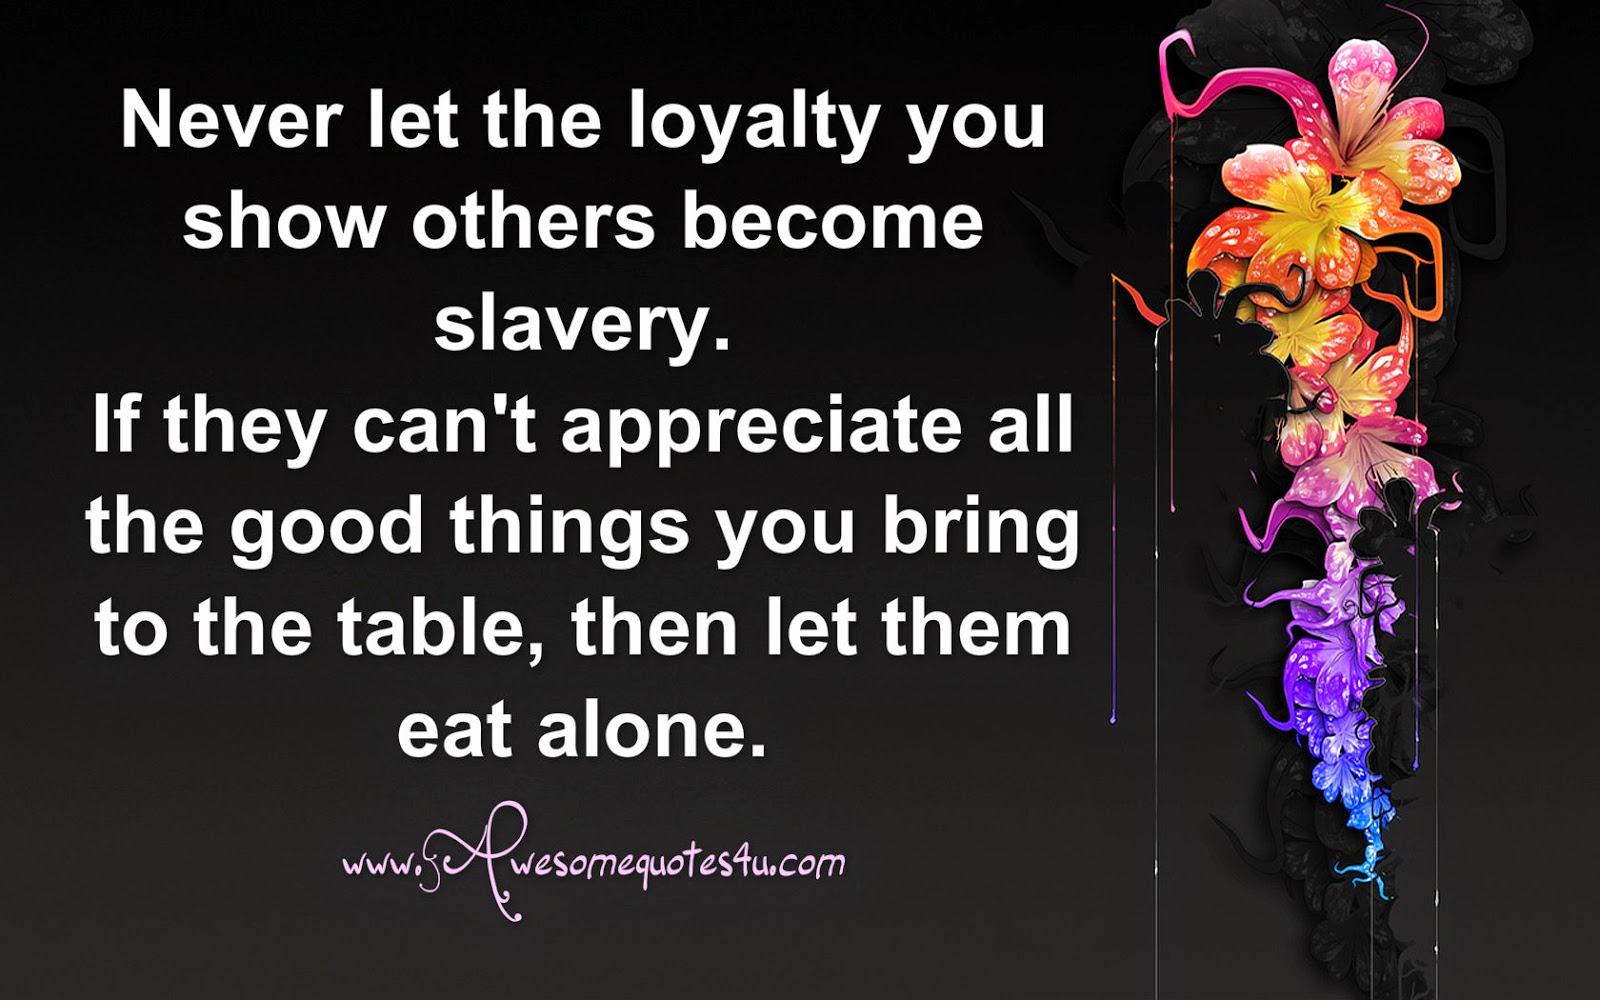 Never let your loyalty be e slavery